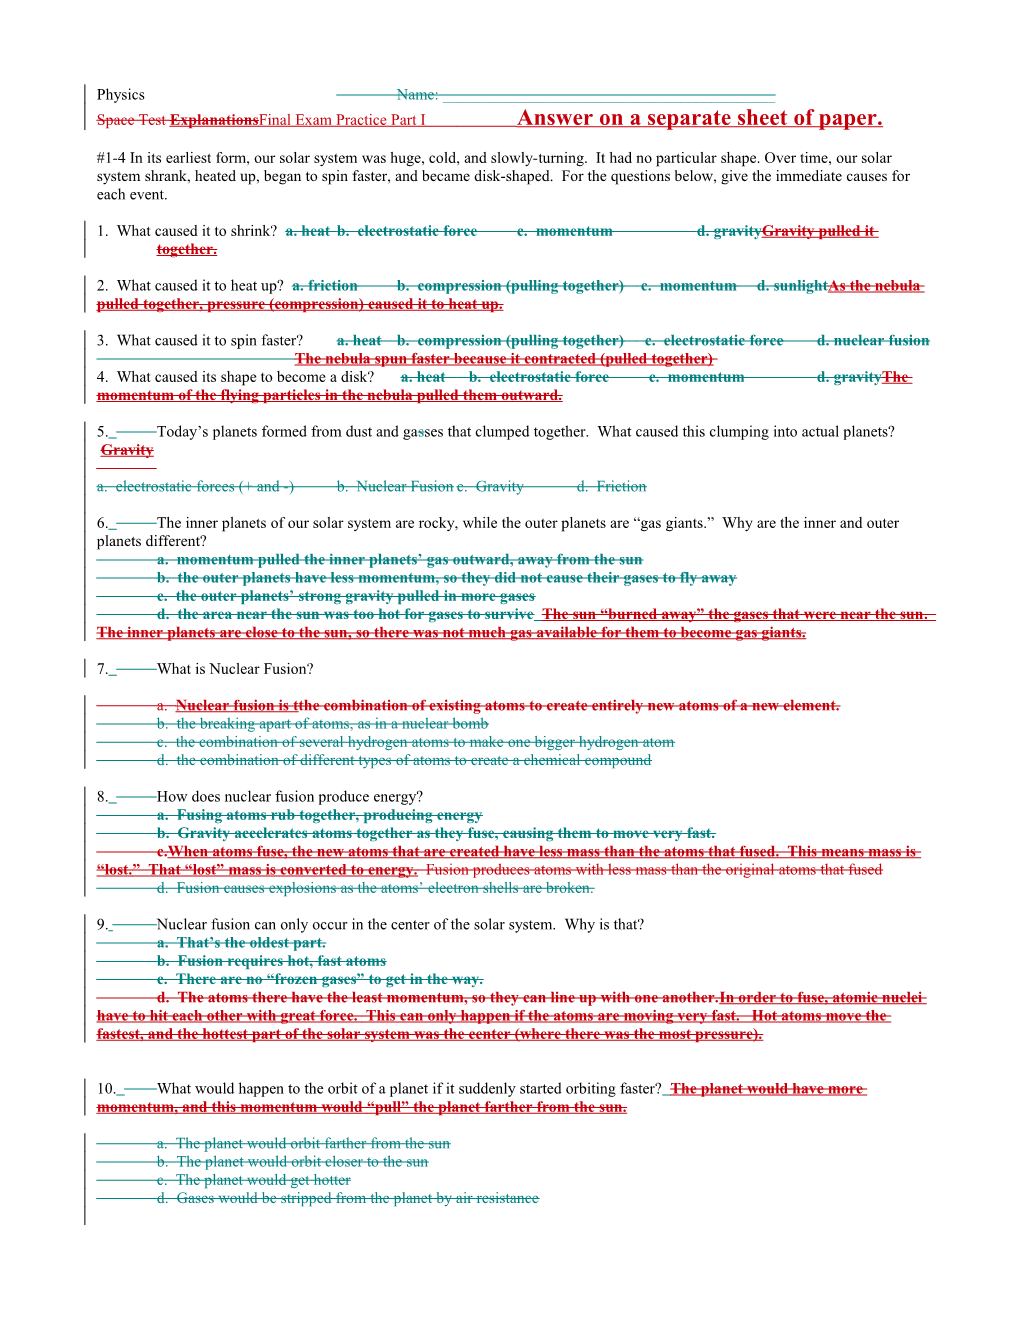 Space Test Explanationsfinal Exam Practice Part Ianswer on a Separate Sheet of Paper